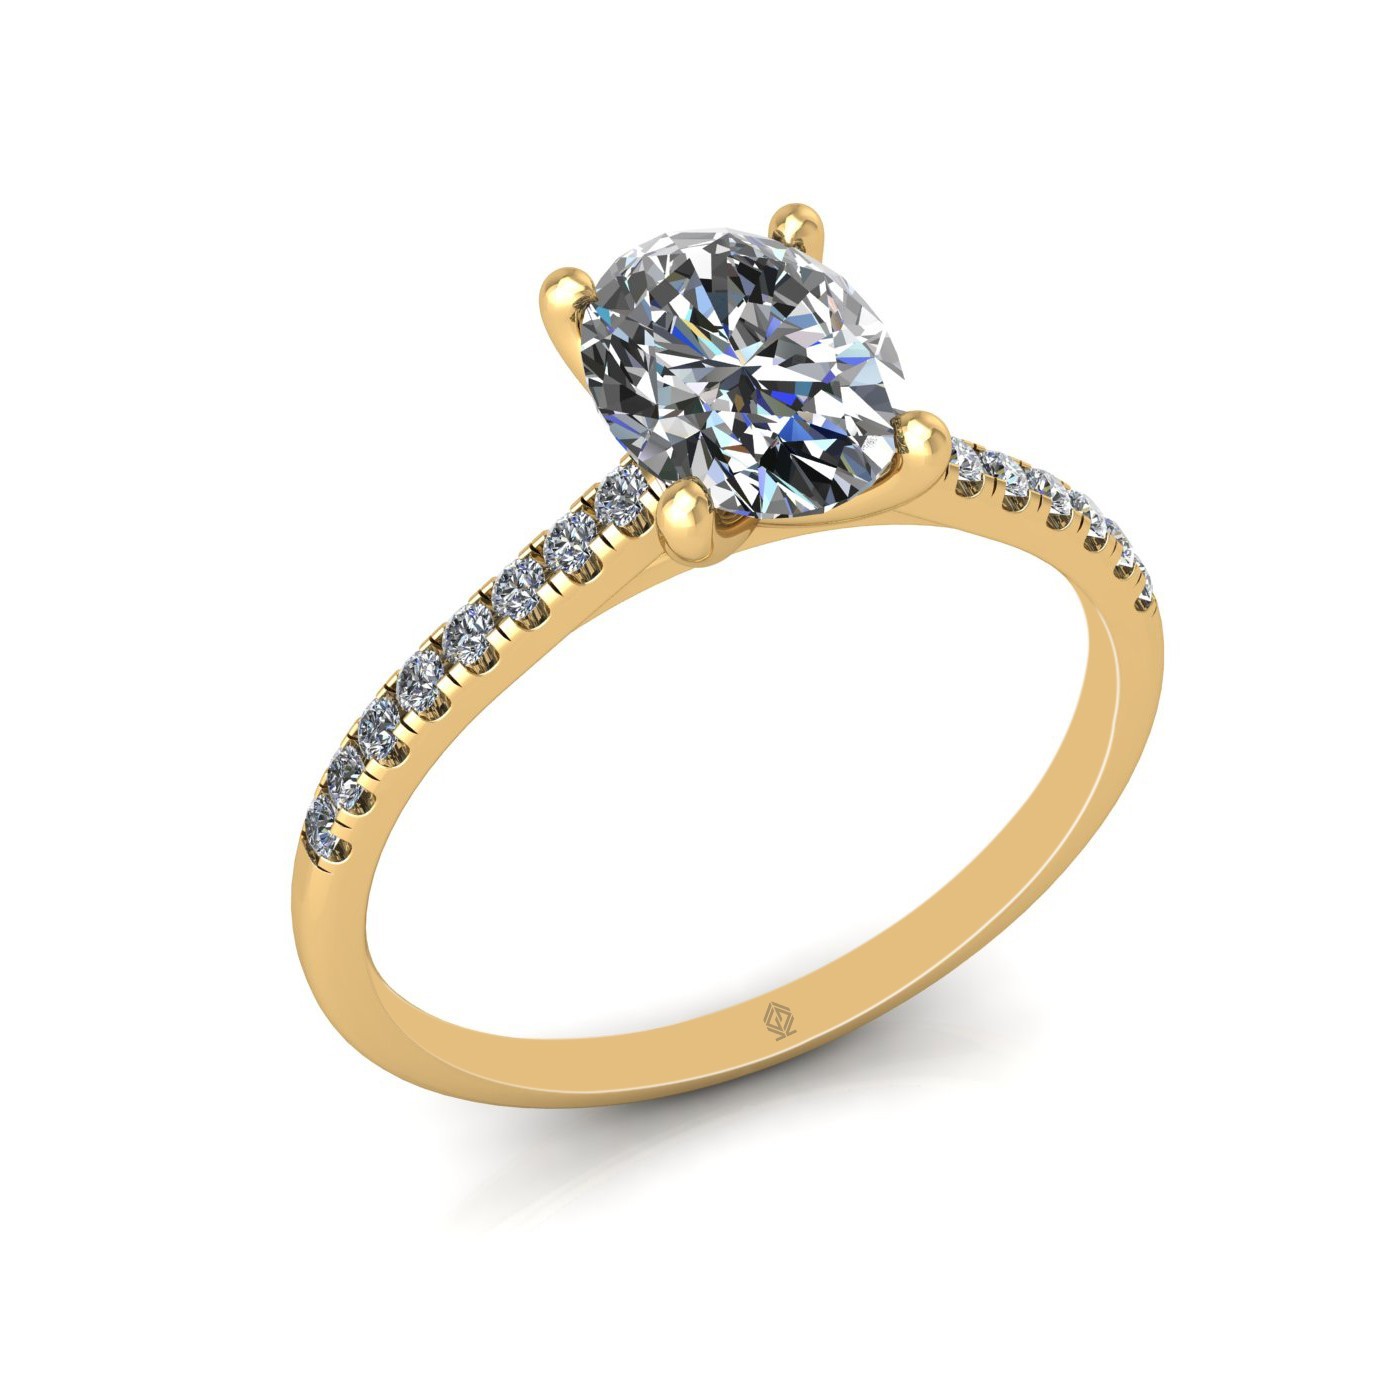 18K YELLOW GOLD 4 PRONGS OVAL CUT DIAMOND ENGAGEMENT RING WITH WHISPER THIN PAVÉ SET BAND